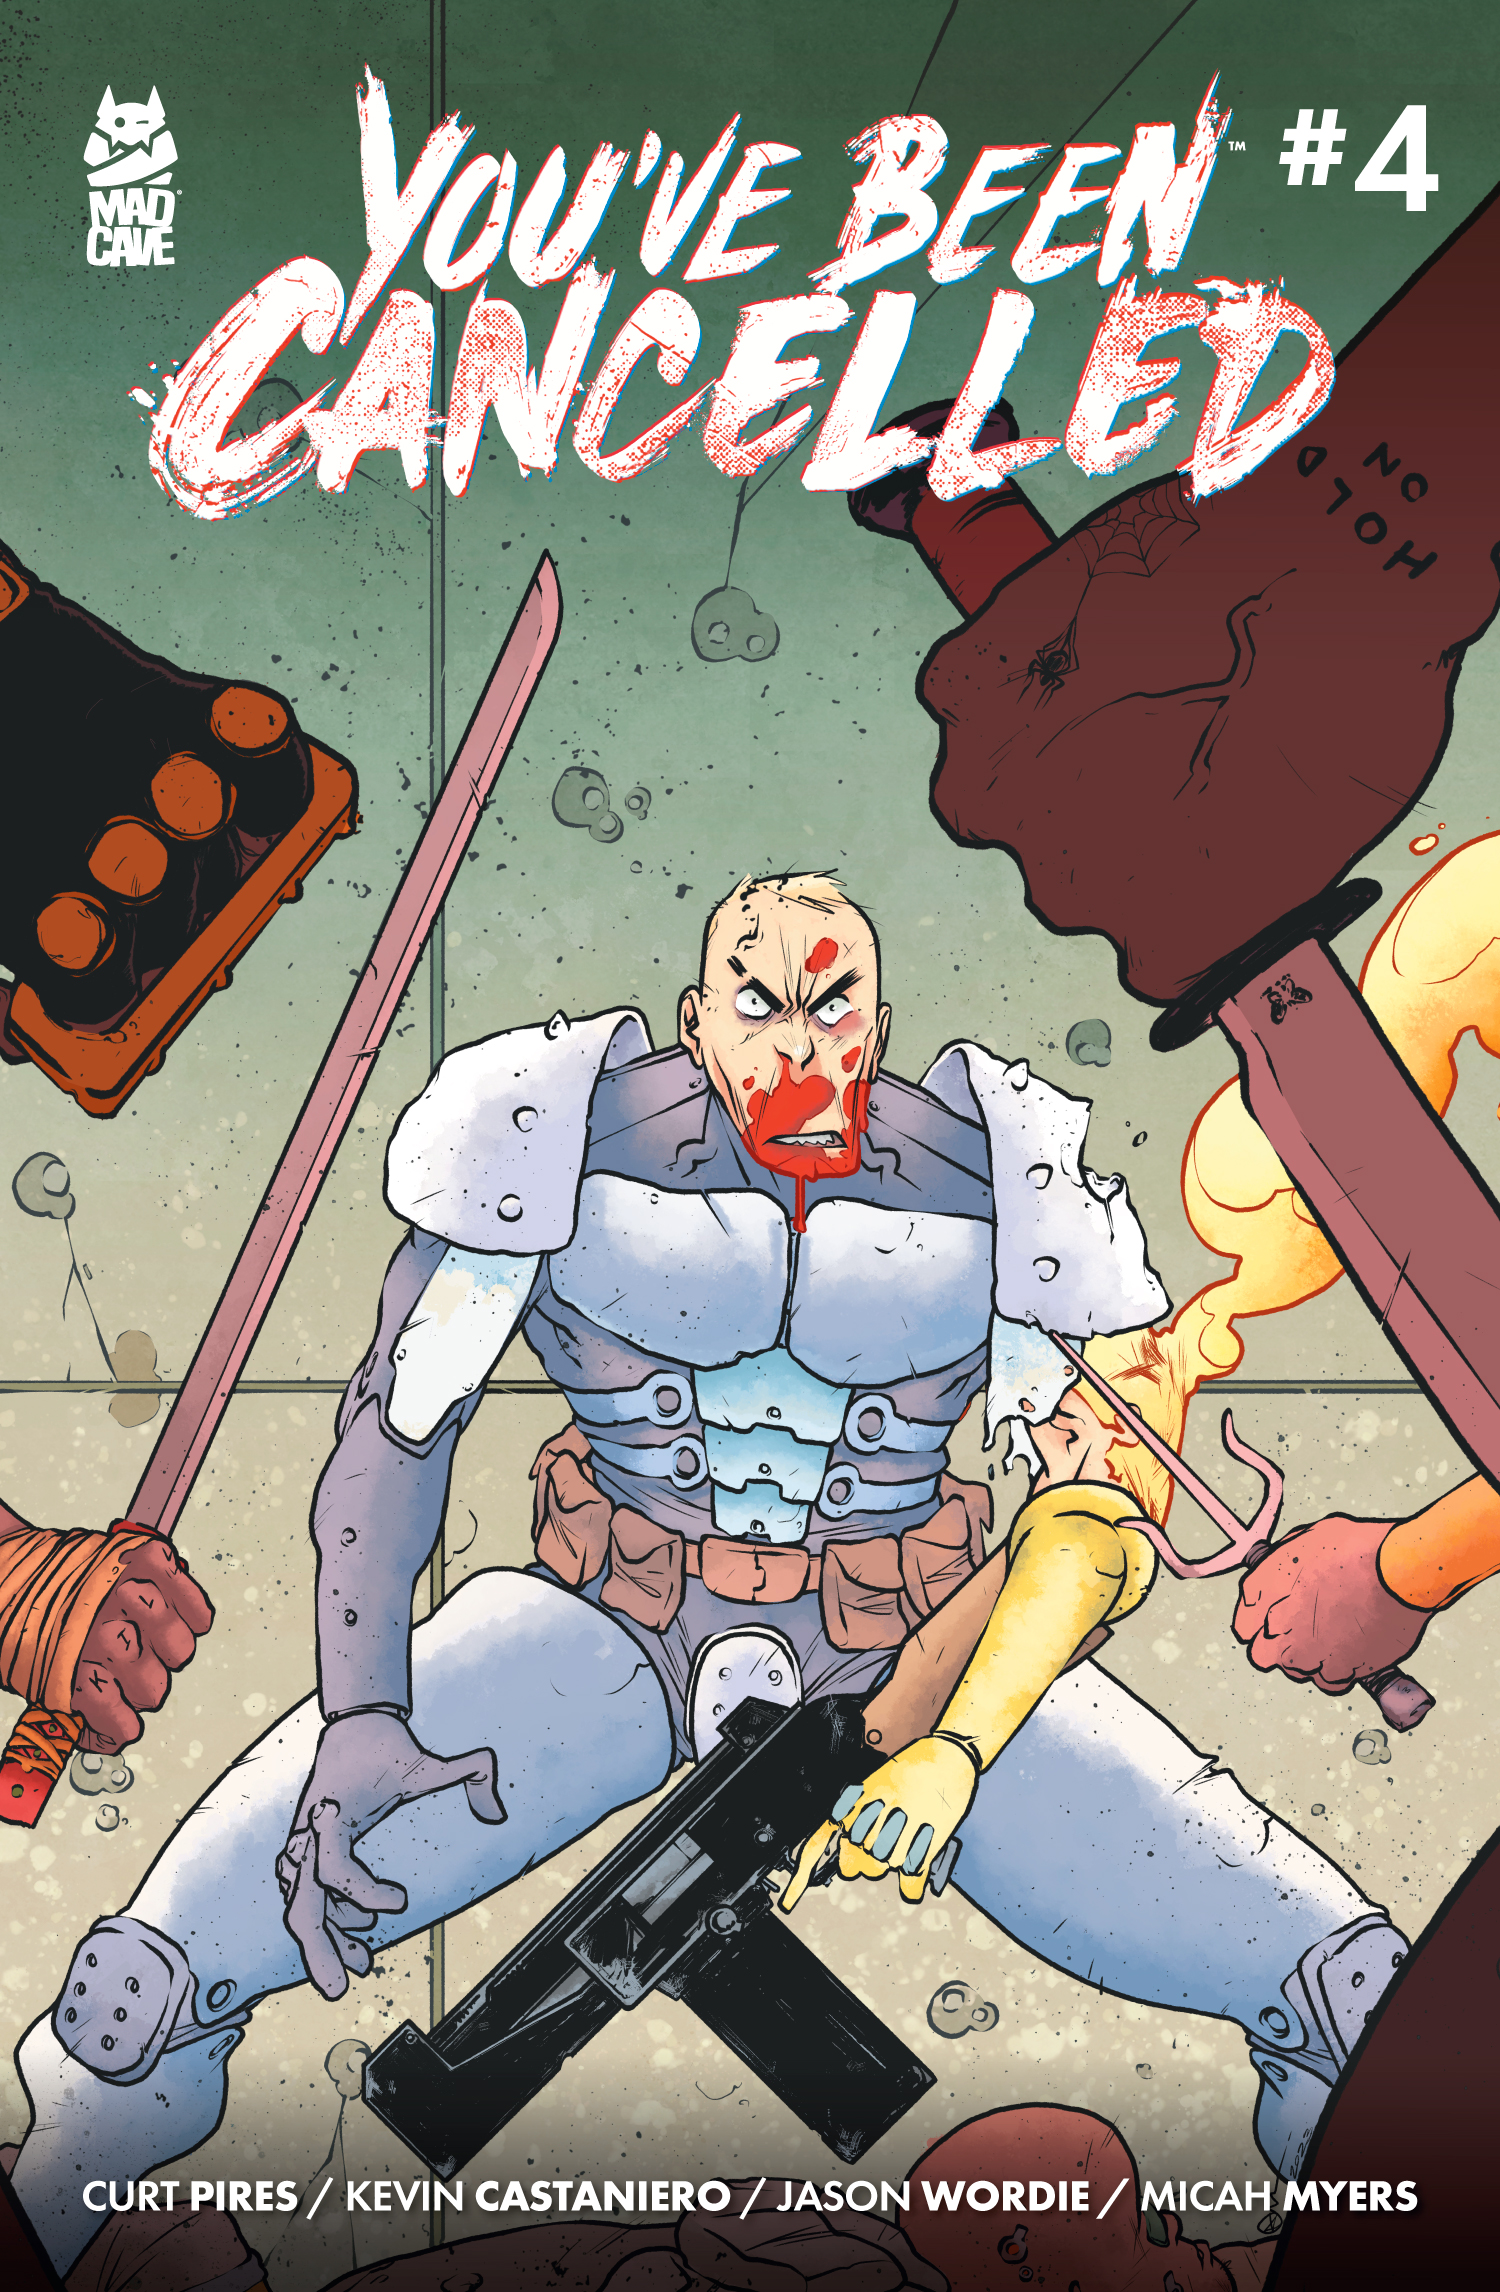 You've Been Cancelled #4 (Mature) (Of 4)